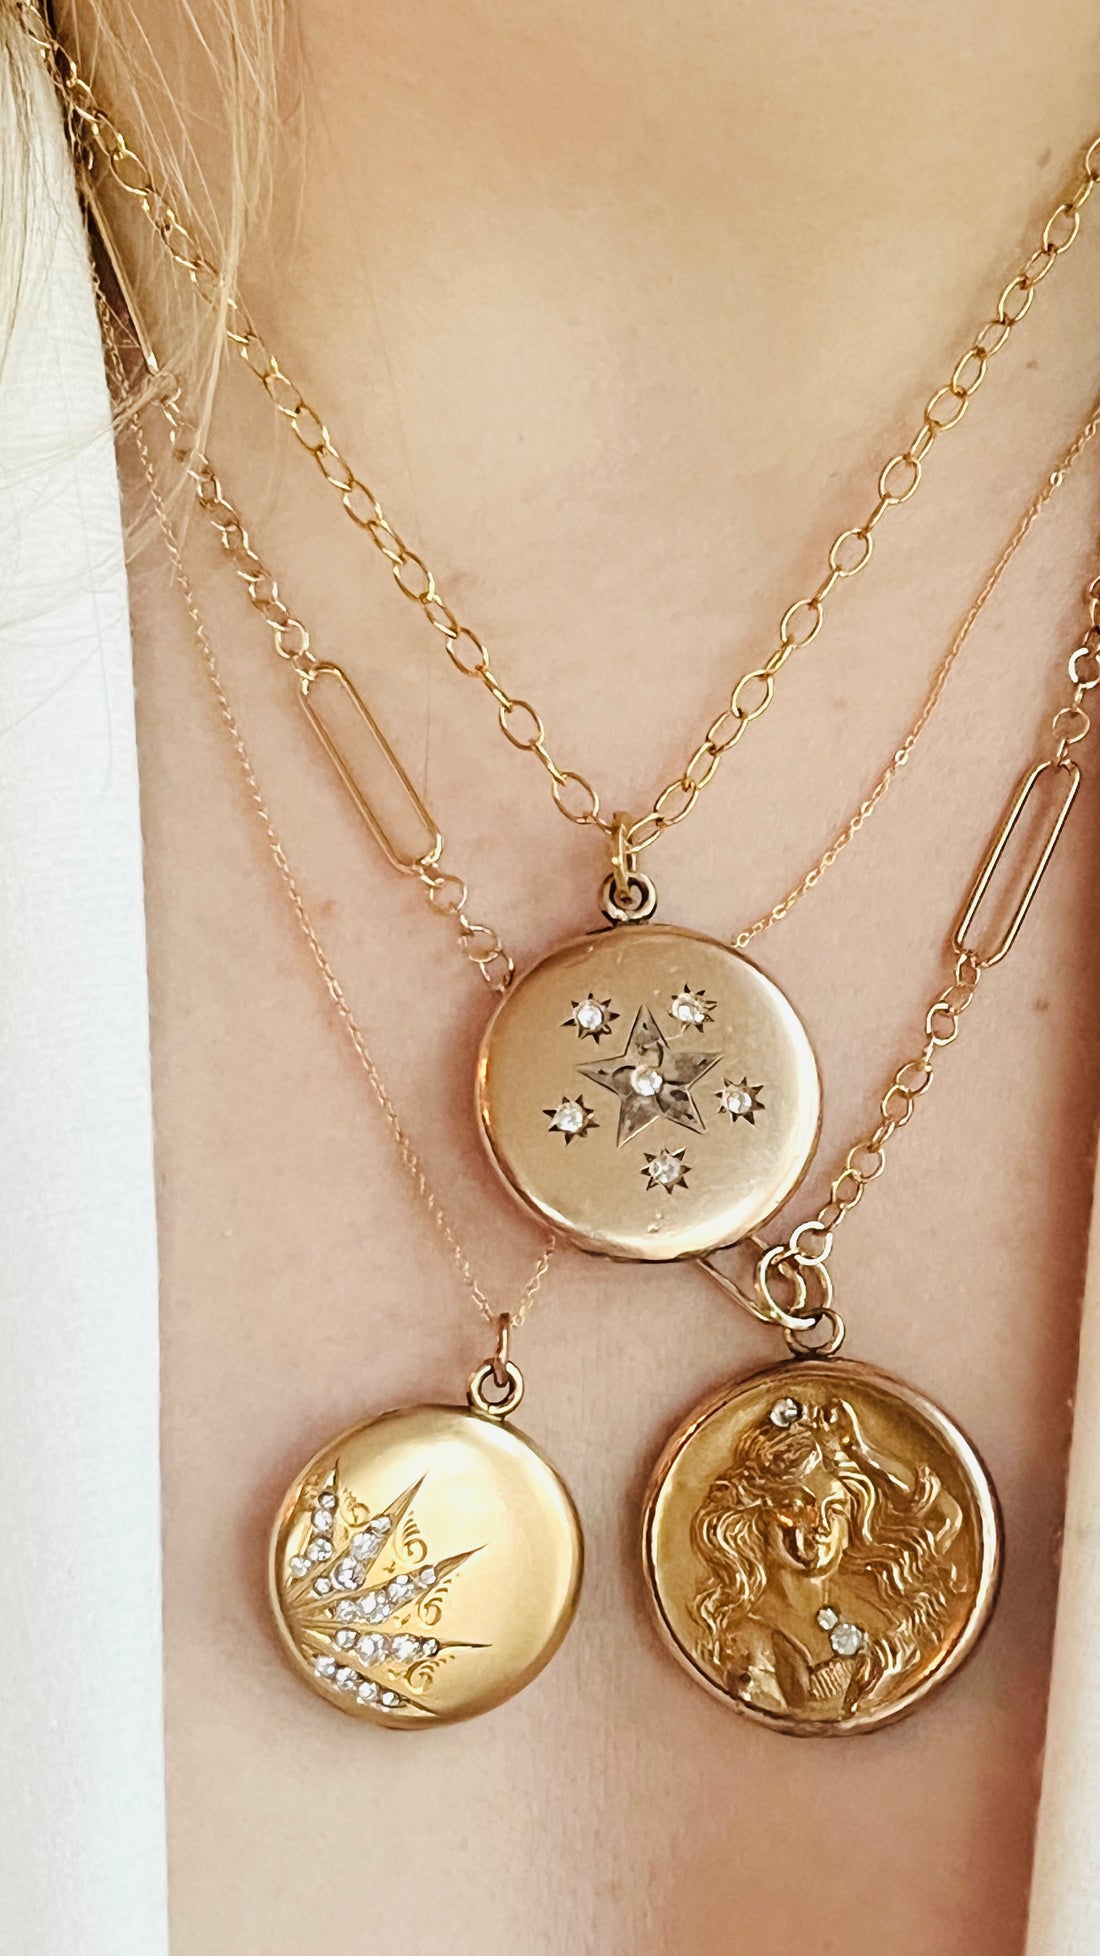 Shop our collection of Antique Lockets at hipV Modern Vintage Jewelry